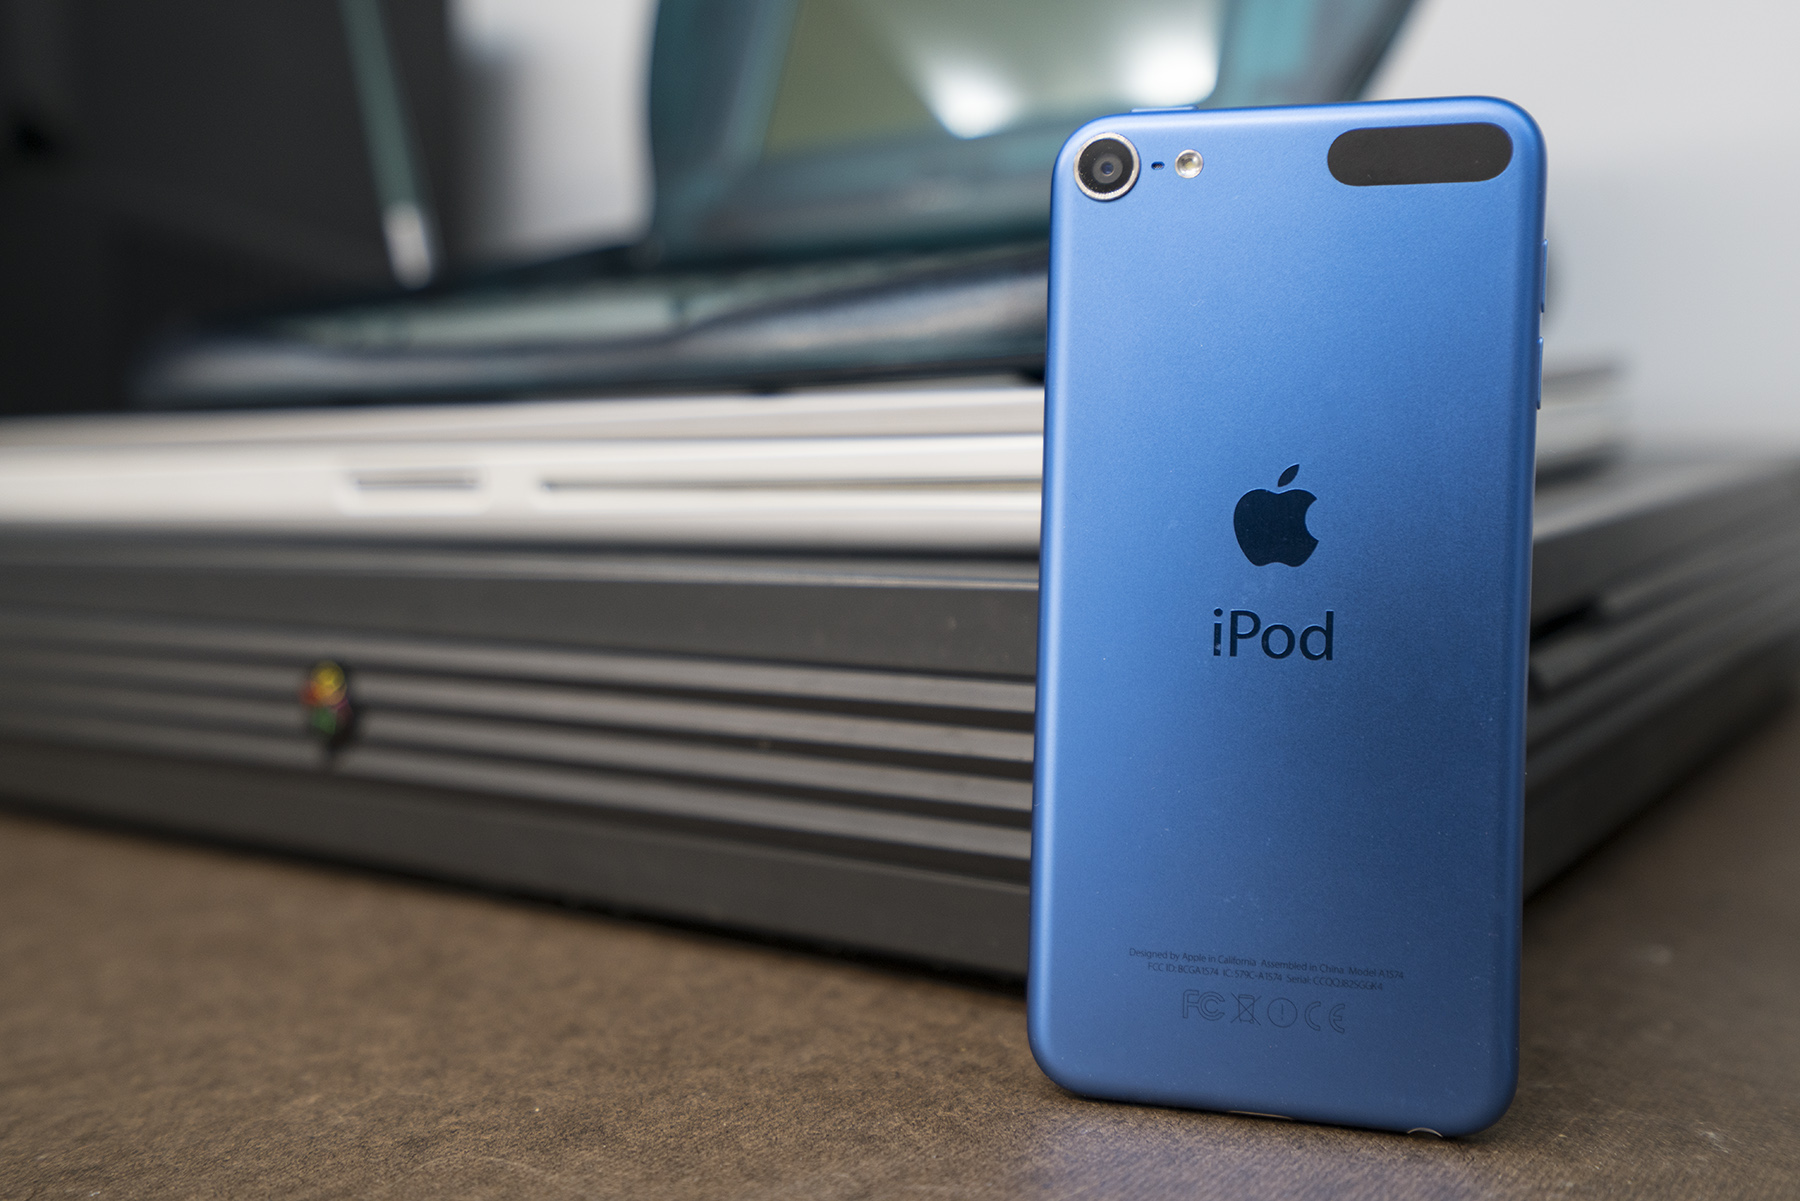 6th-gen iPod touch